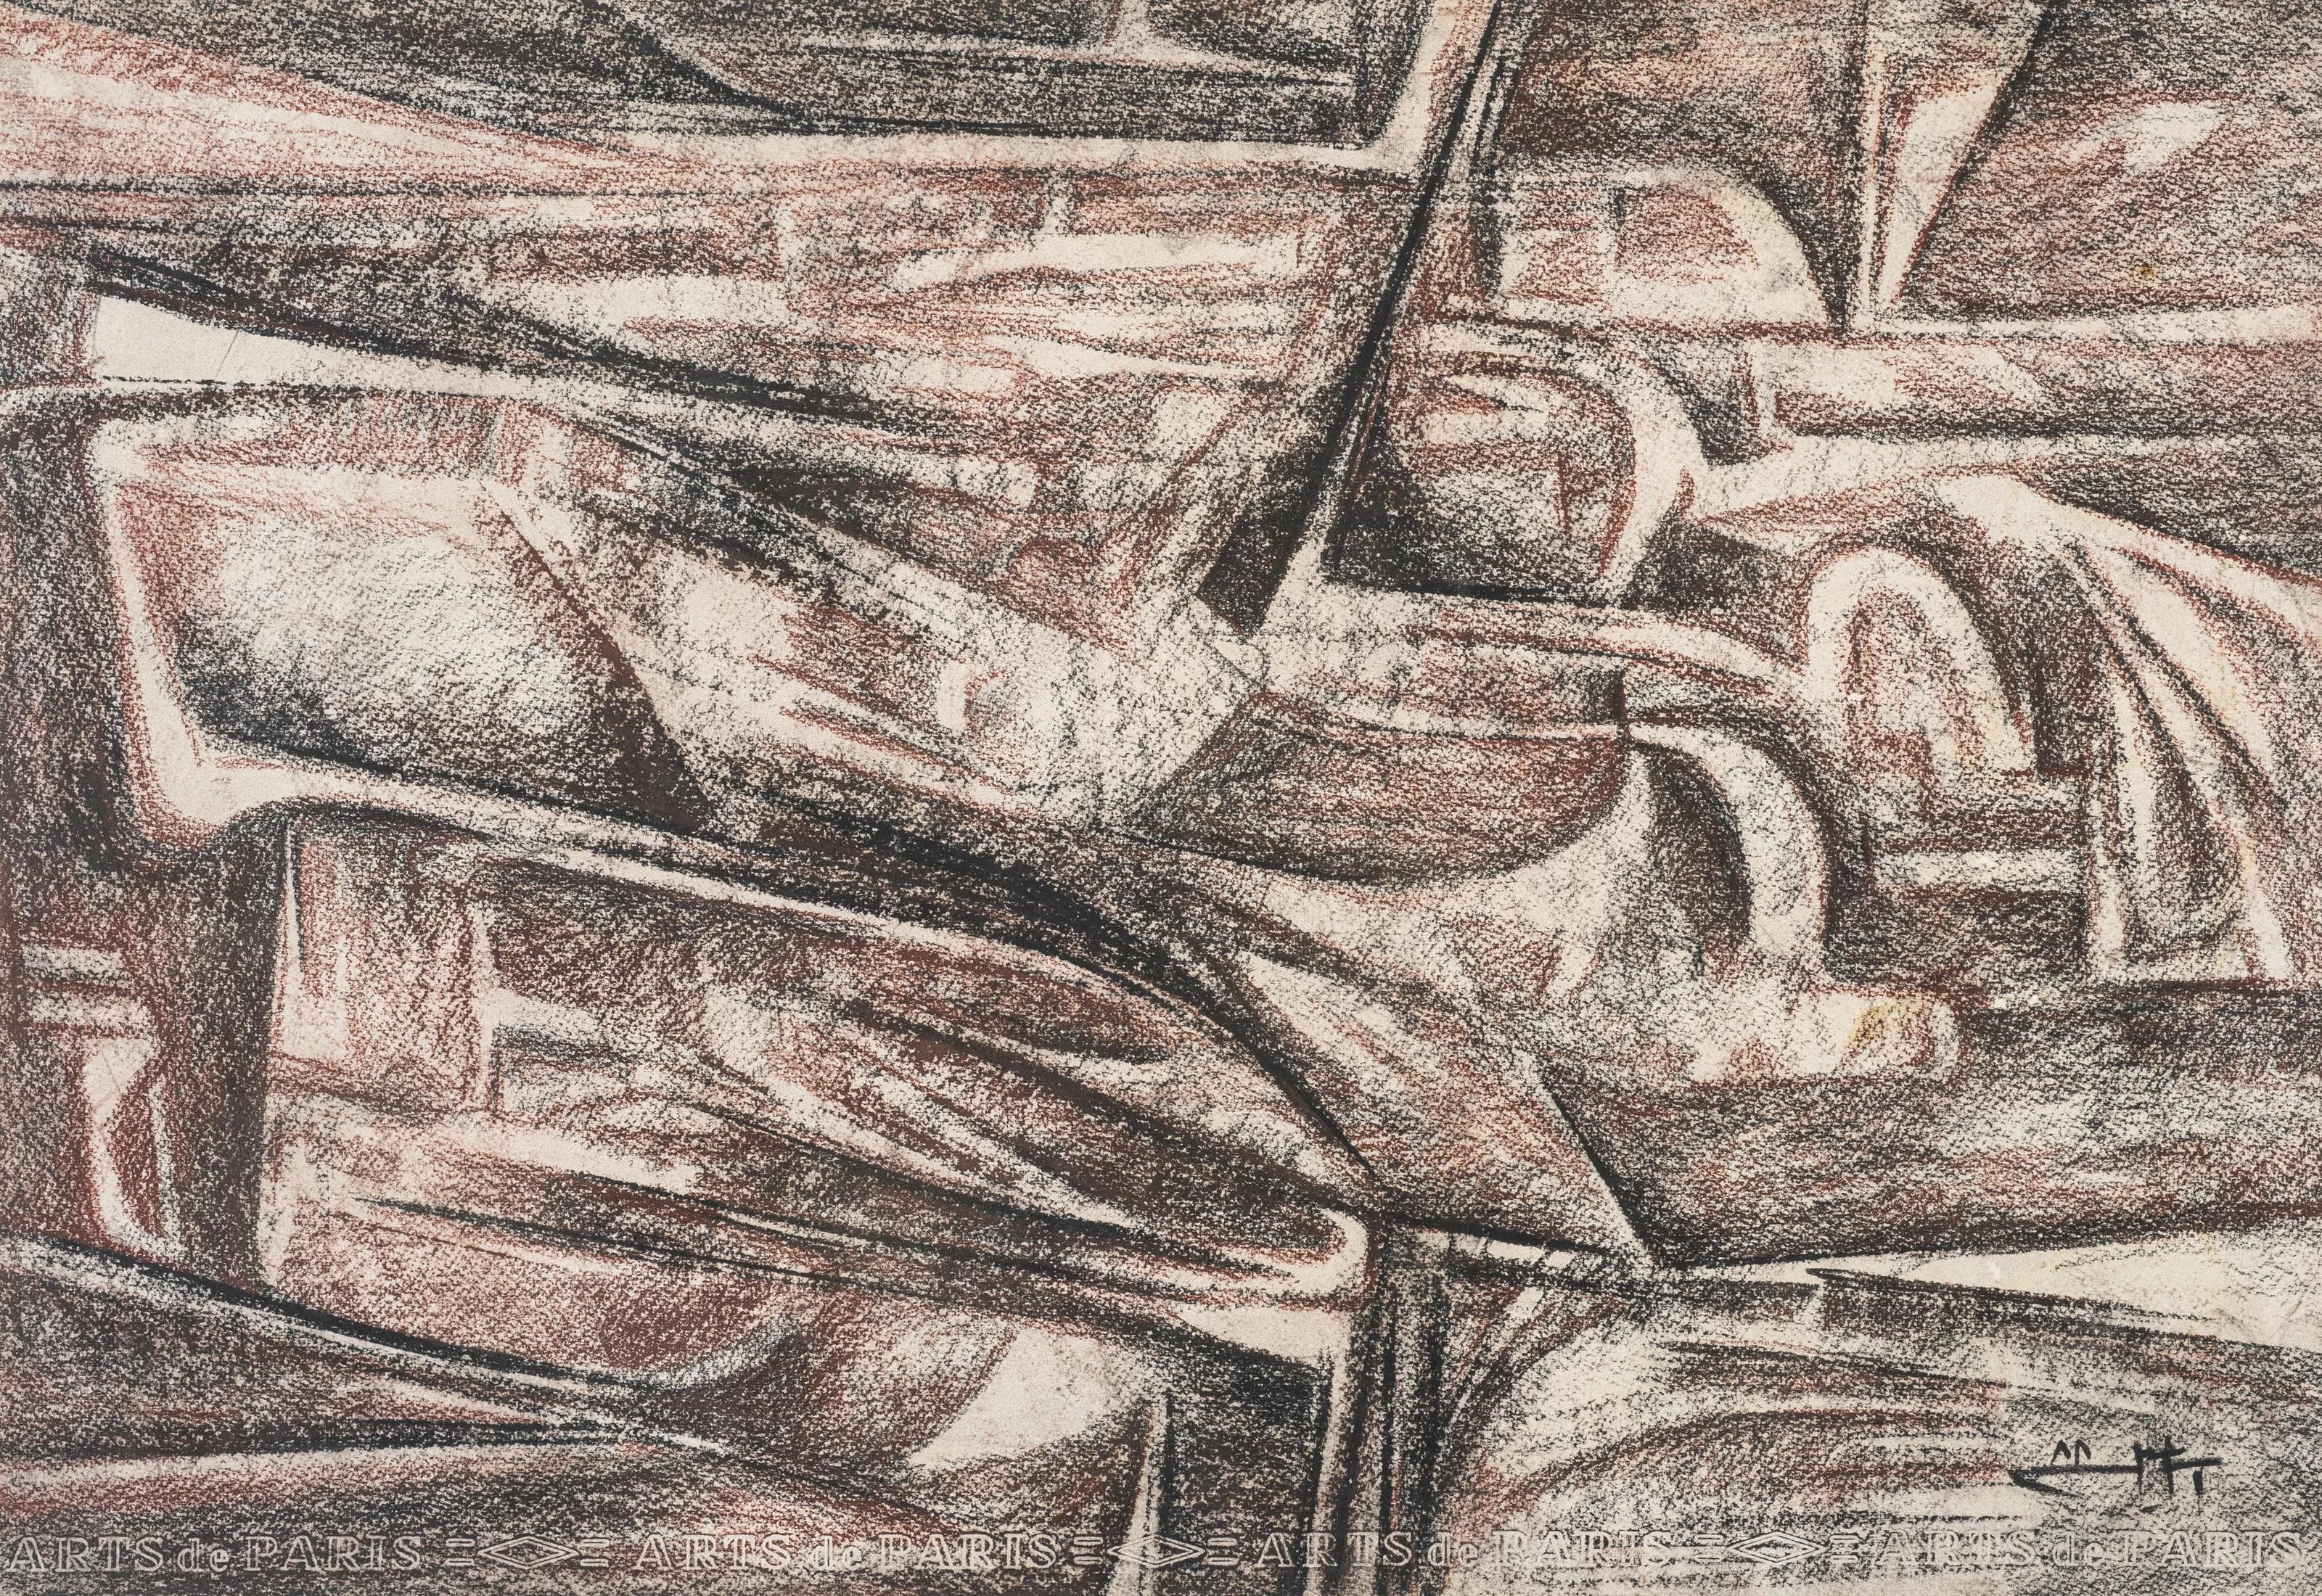 Mohammed Ismail  Abstract Drawing – „Abstrakte Komposition“ Gemälde Pastell auf Papier 14" x 18" in von Mohammed Ismail